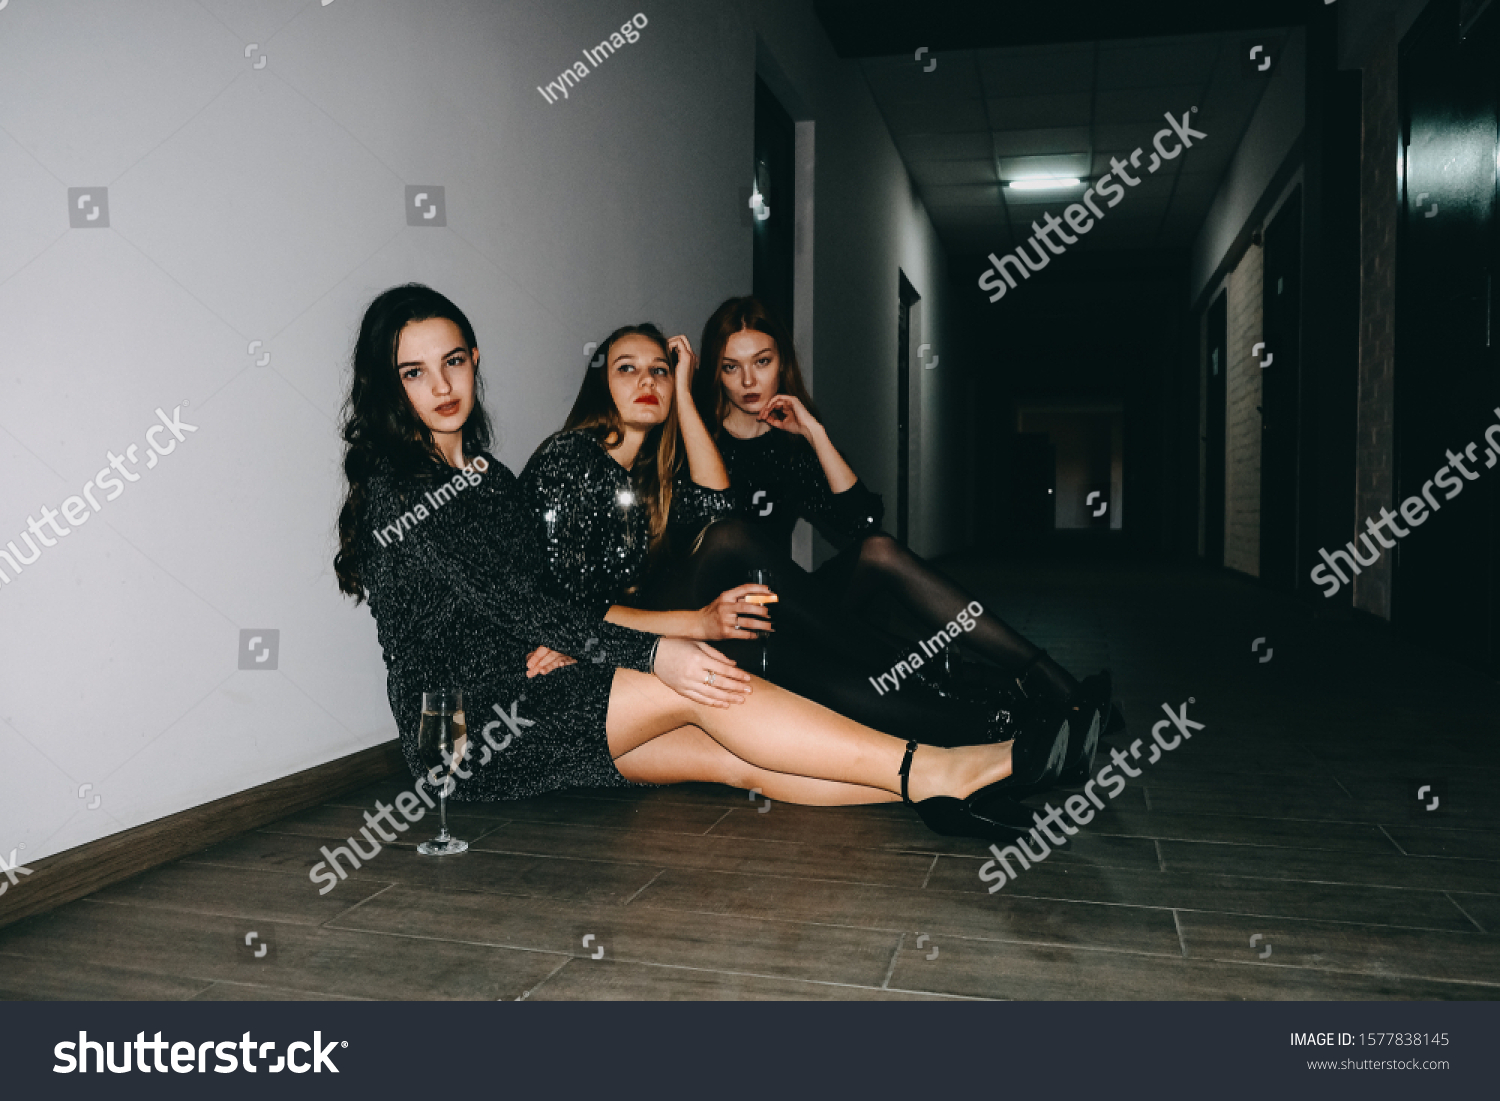 After party, jet set, clubbing, nightlife concept. Tired girls with glasses of champagne sit on the floor after celebrating party.   #1577838145